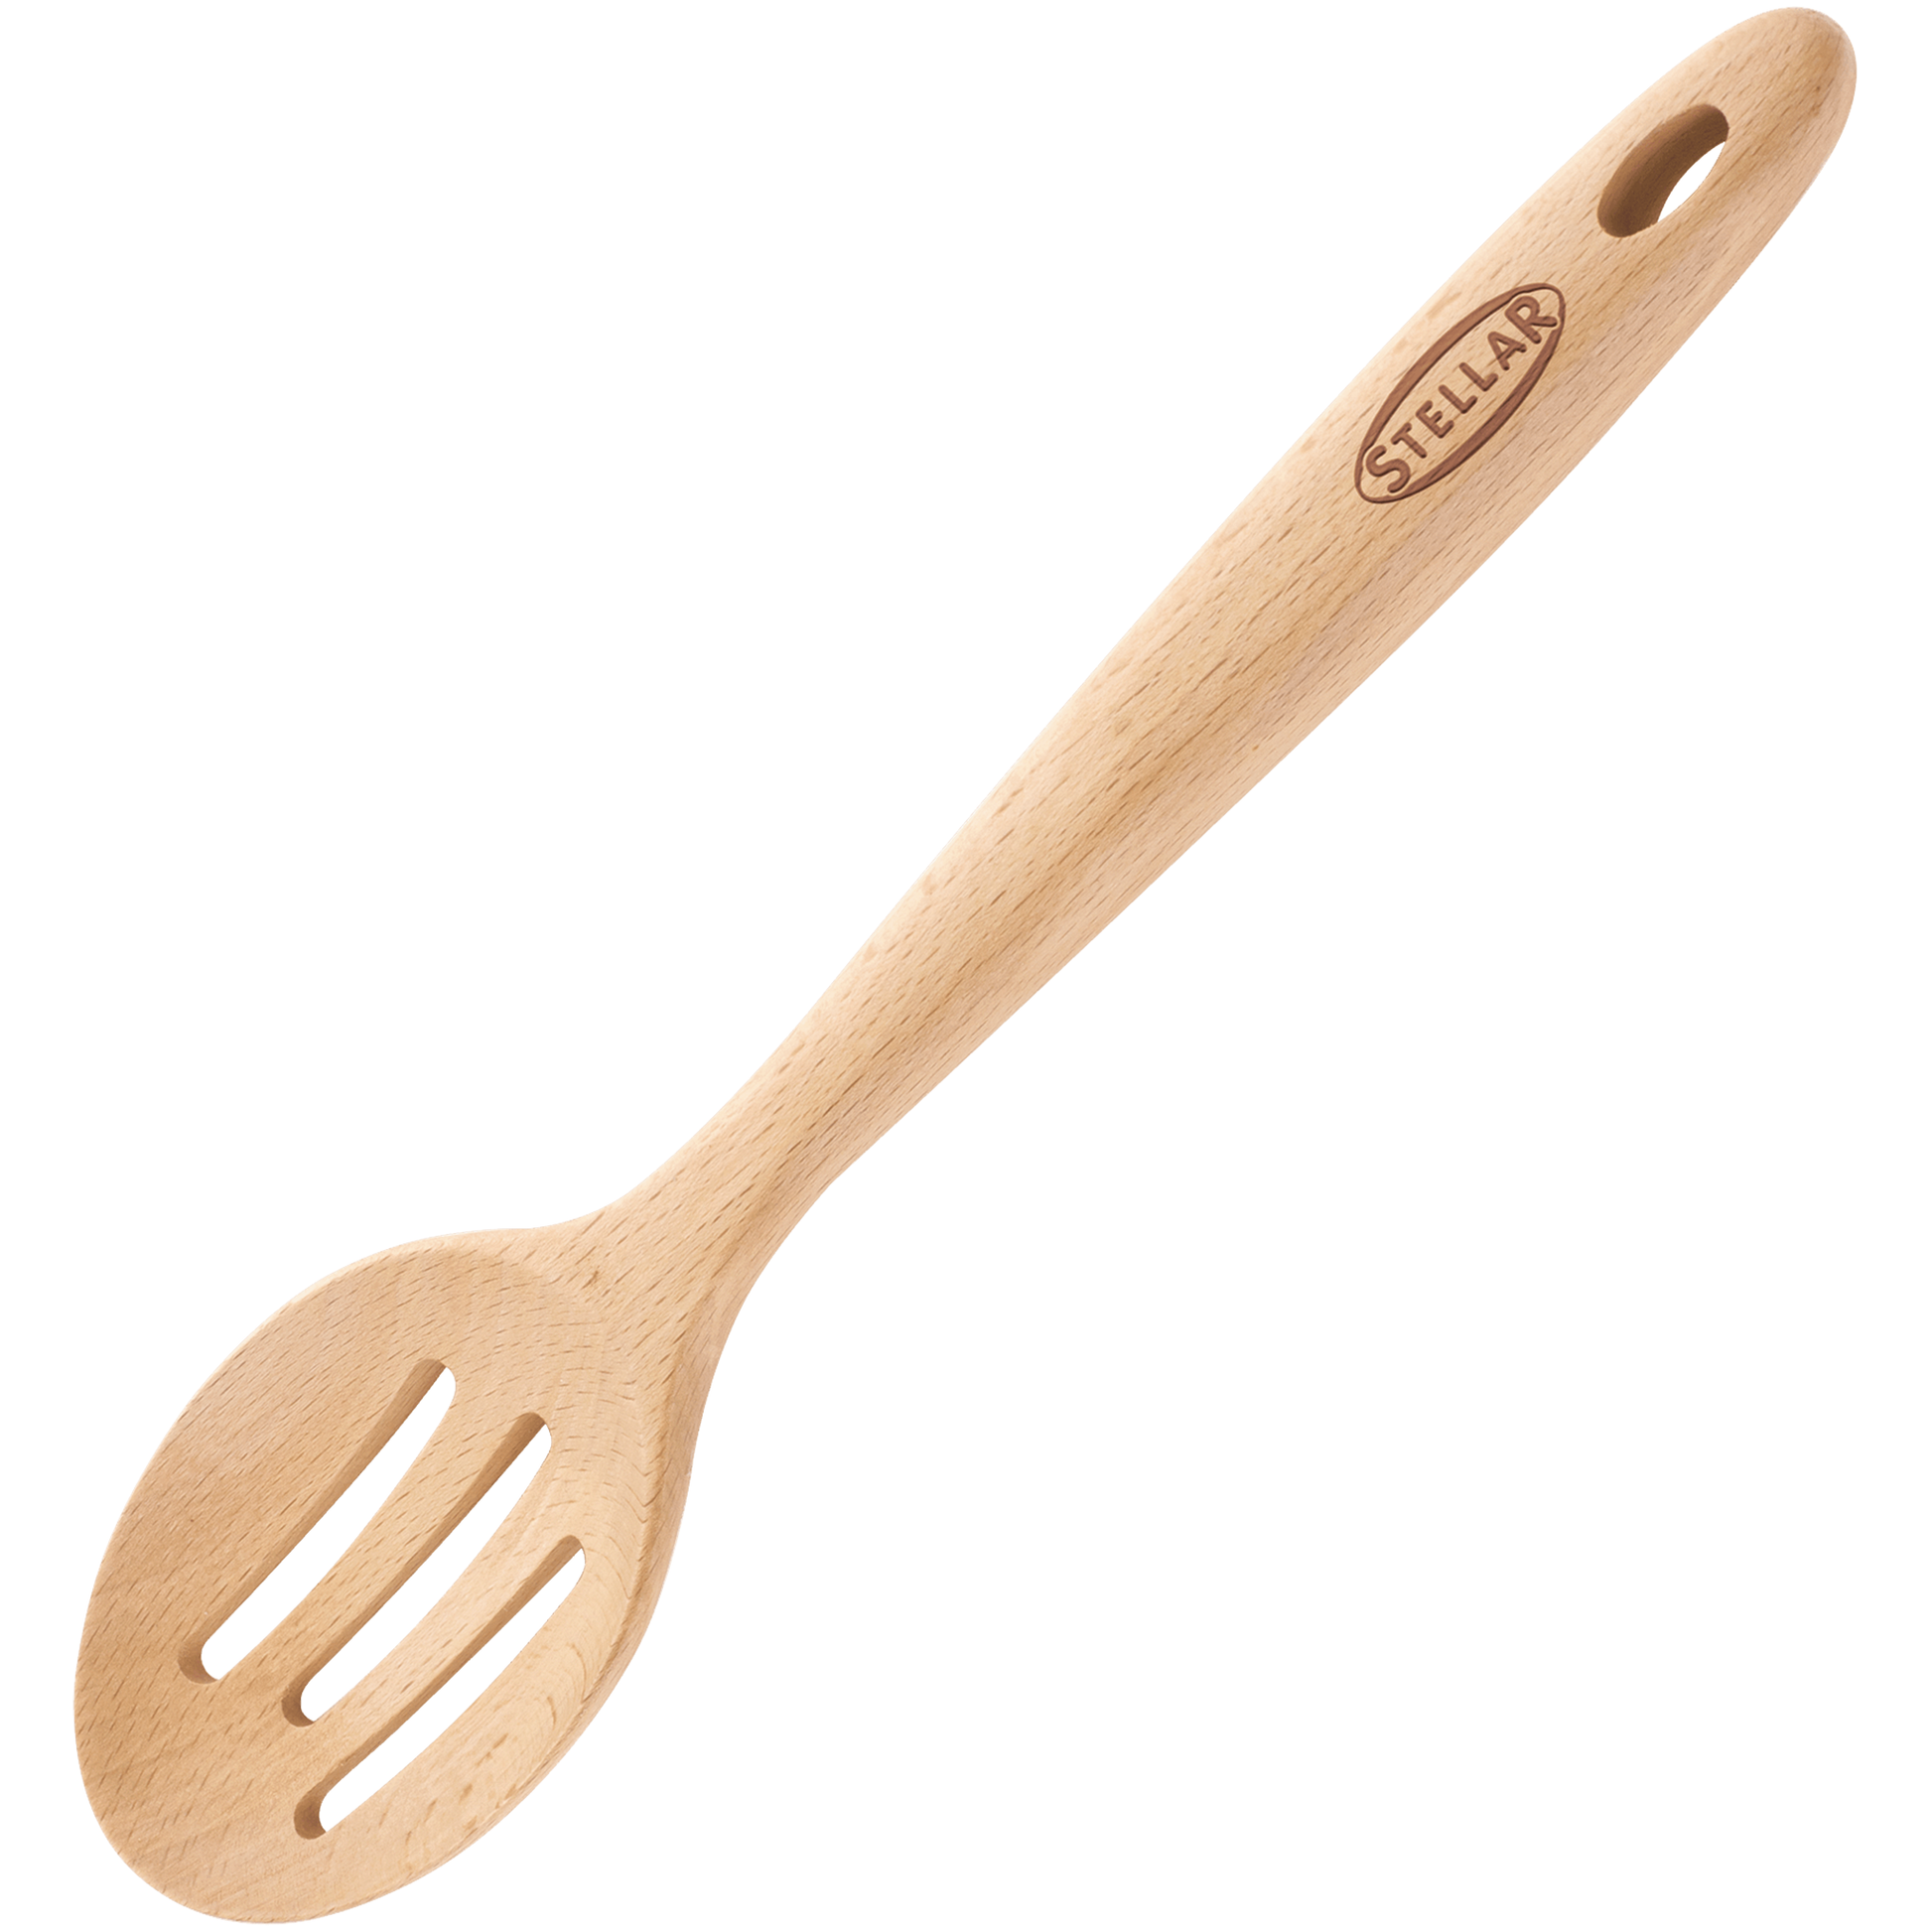 a wooden spoon with three slots